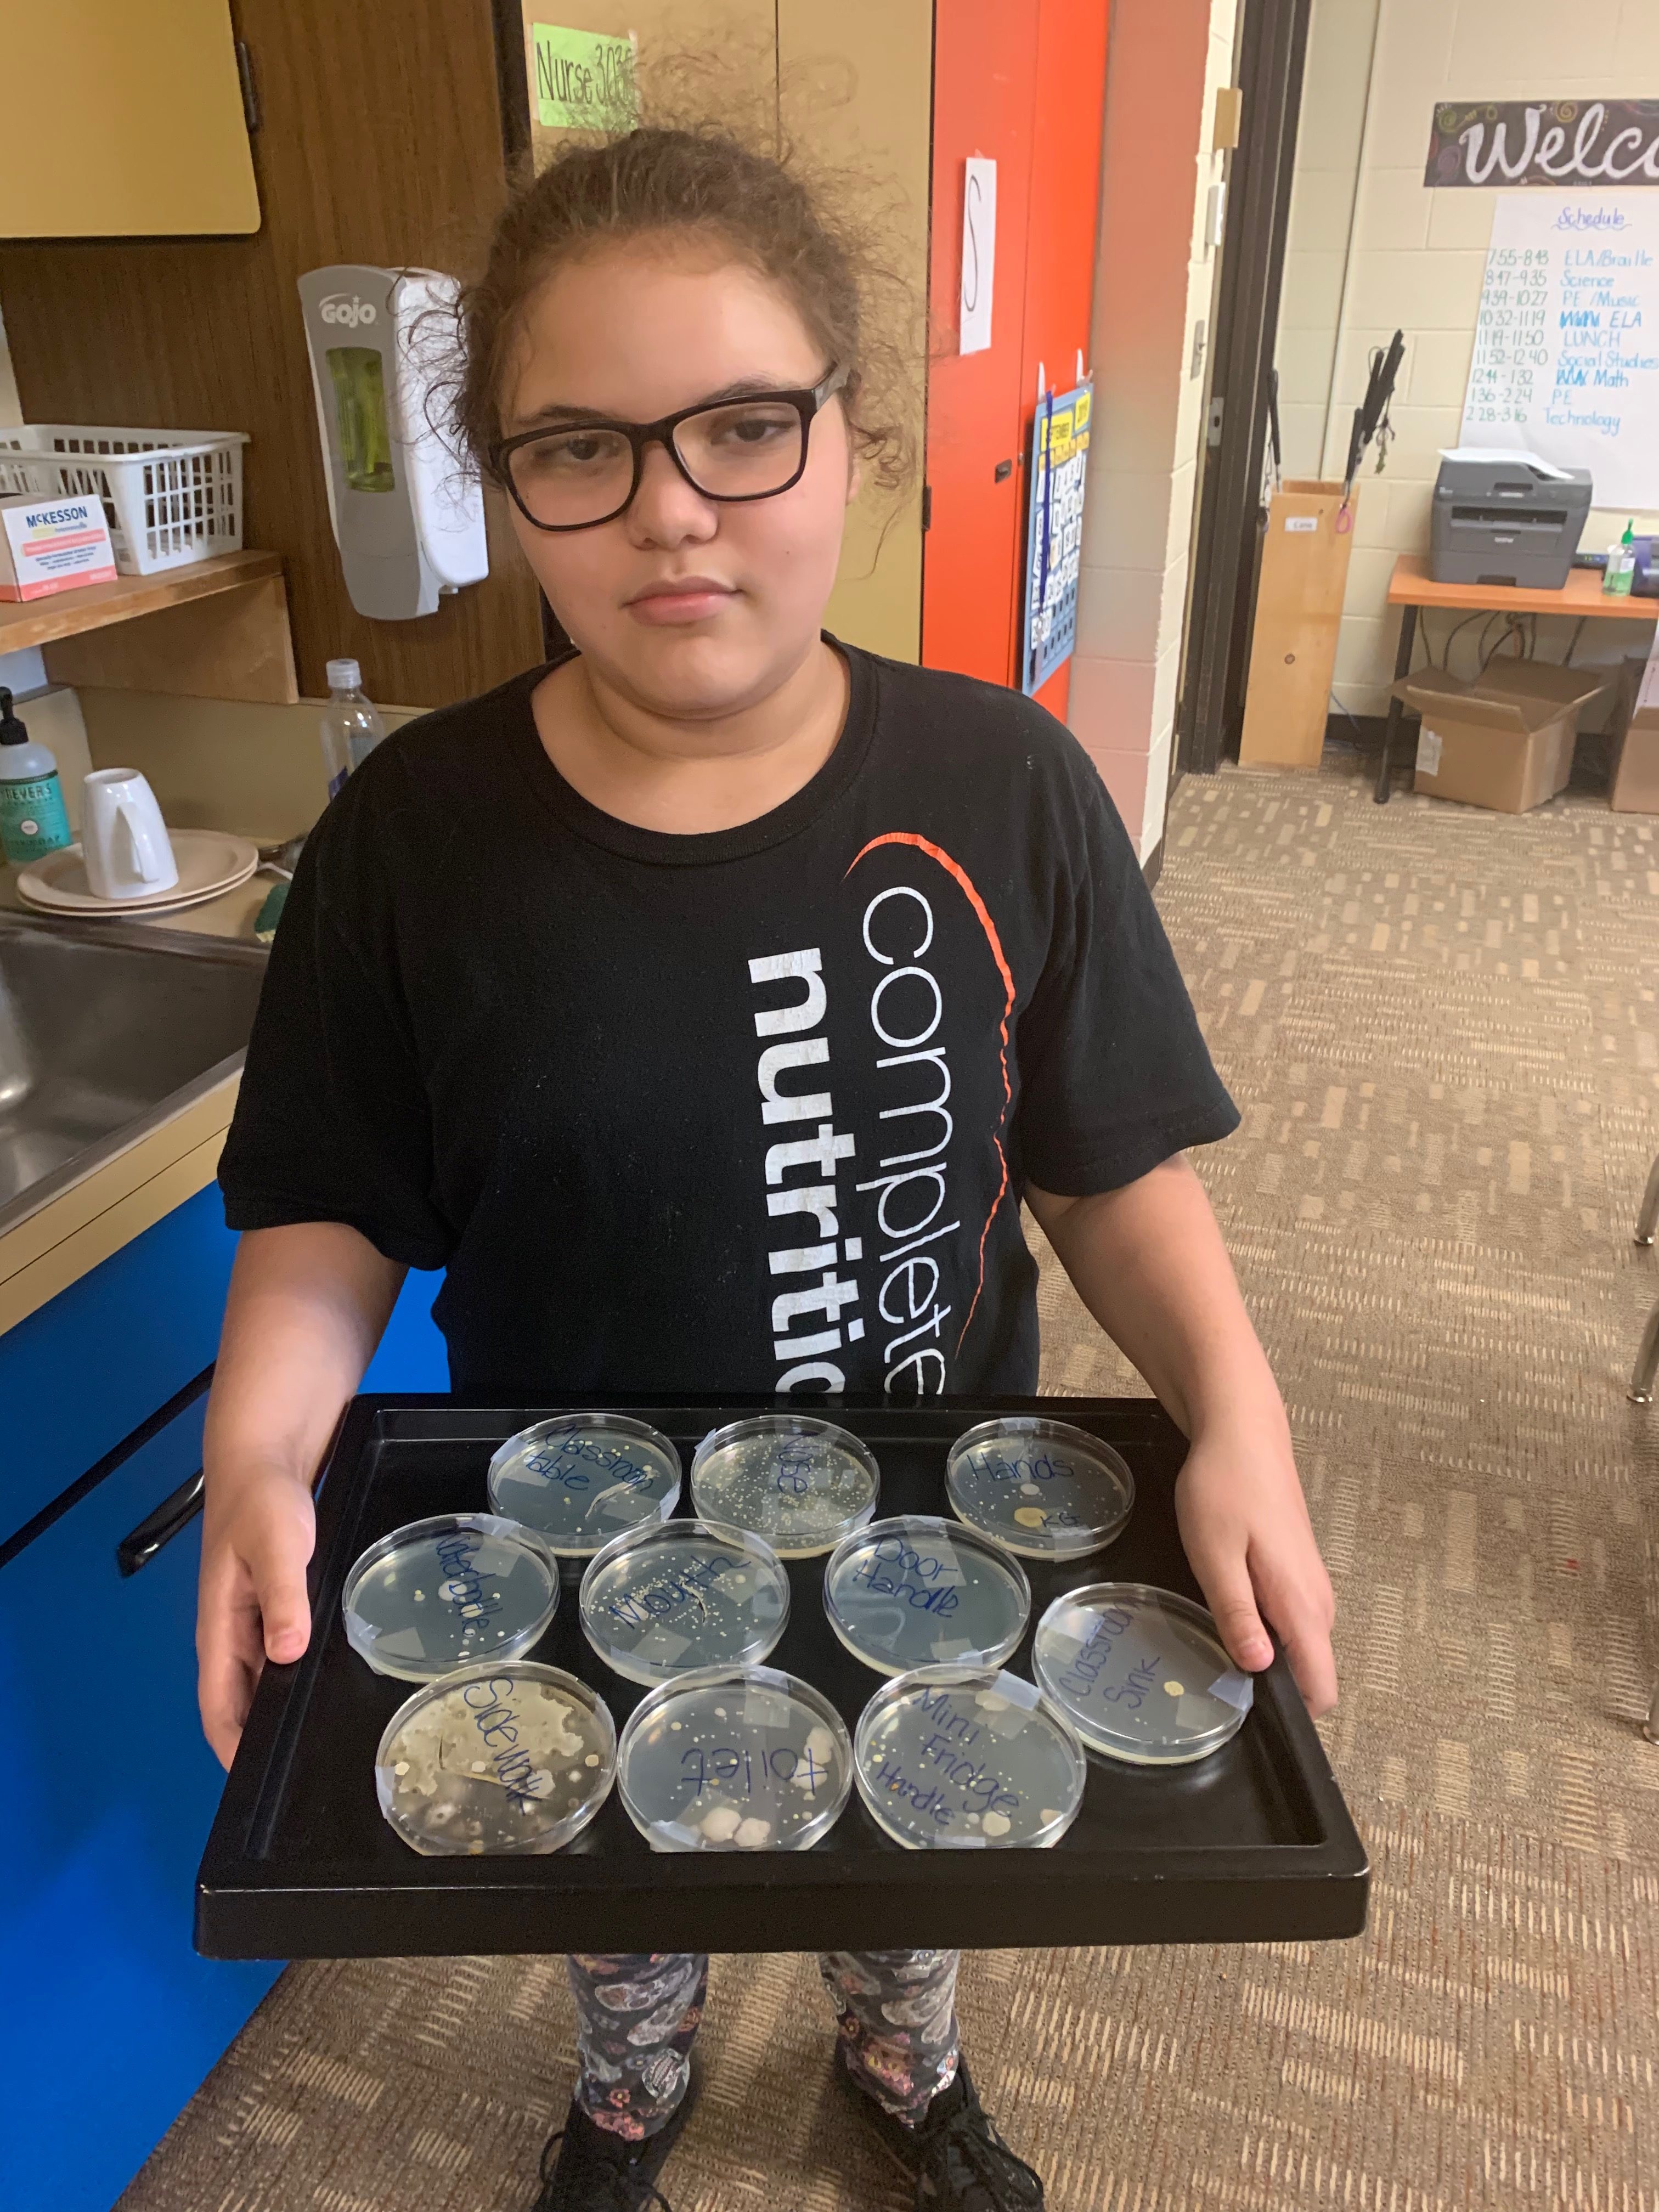 Student holding tray of petri dishes.